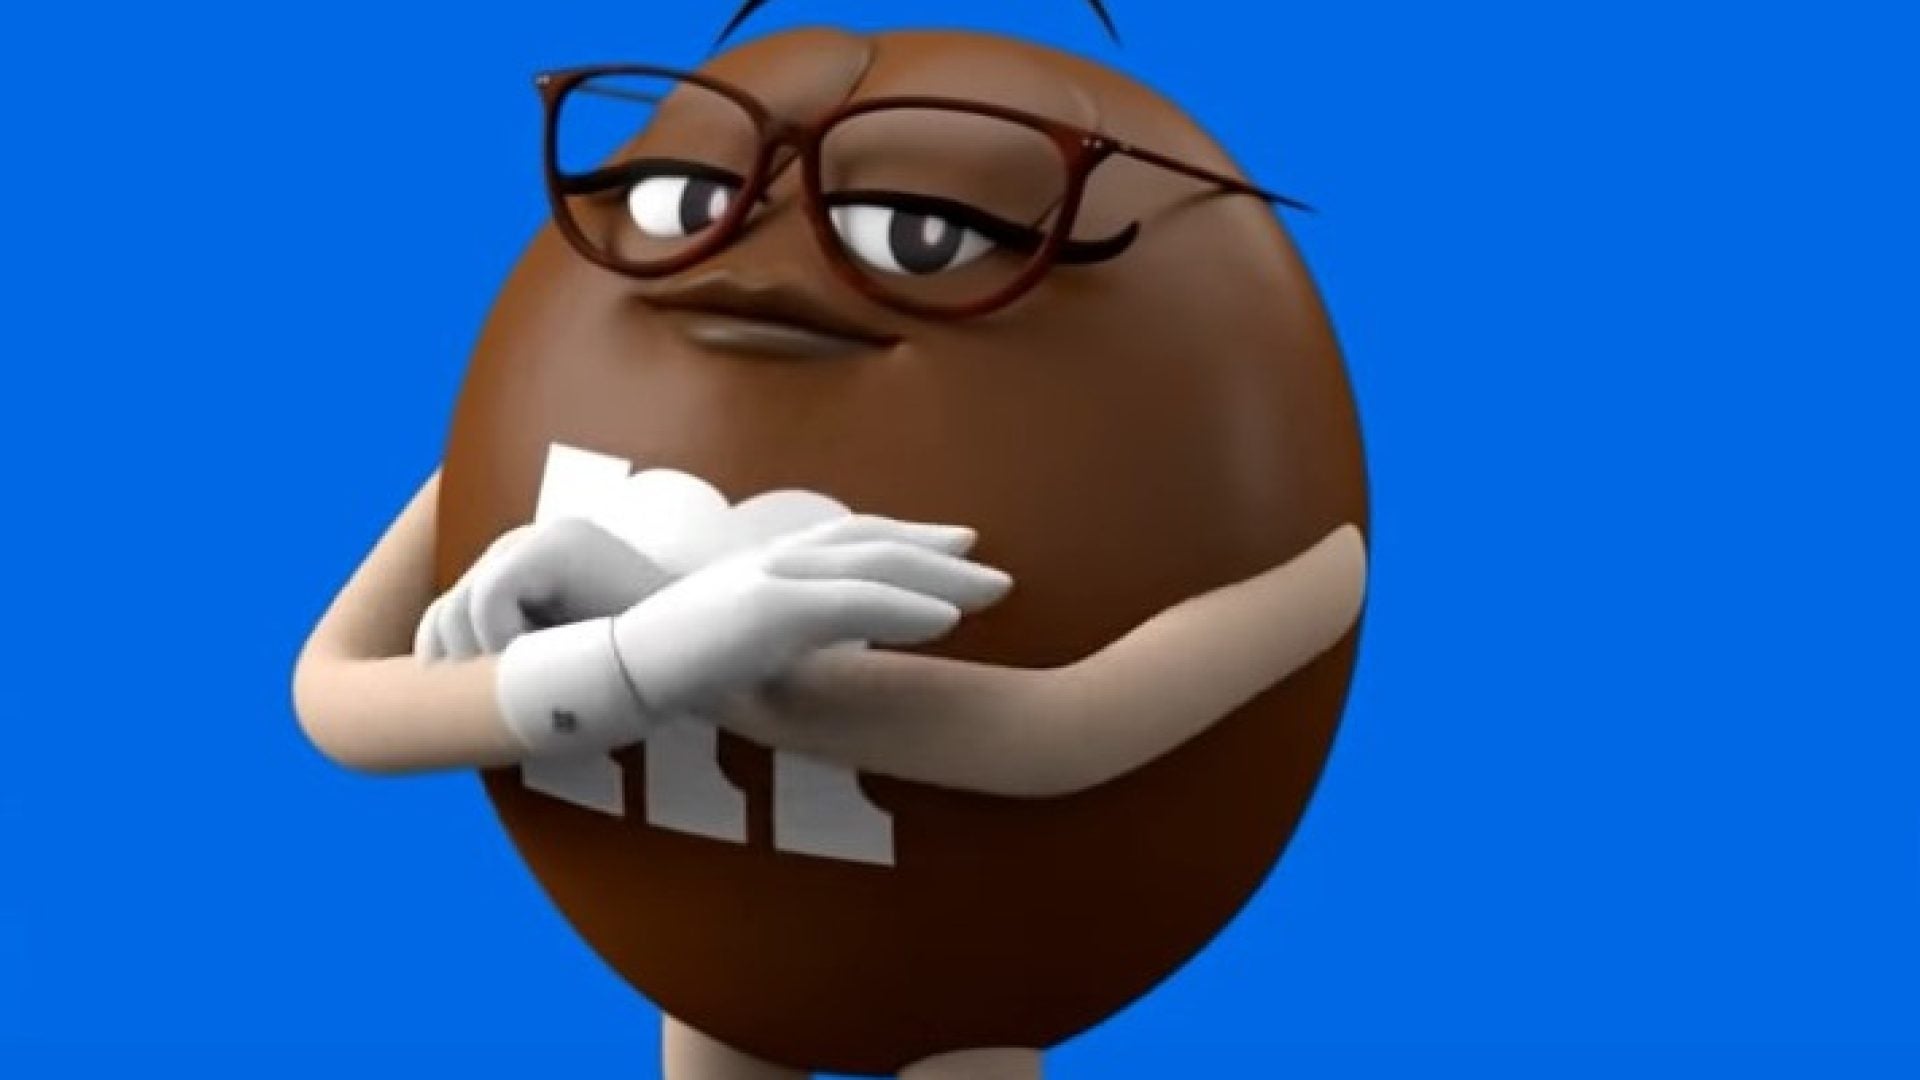 M&M Characters Get A “More Inclusive” Rebrand, But Making Ms. Brown Less Of A Baddie Feels Like An Attack